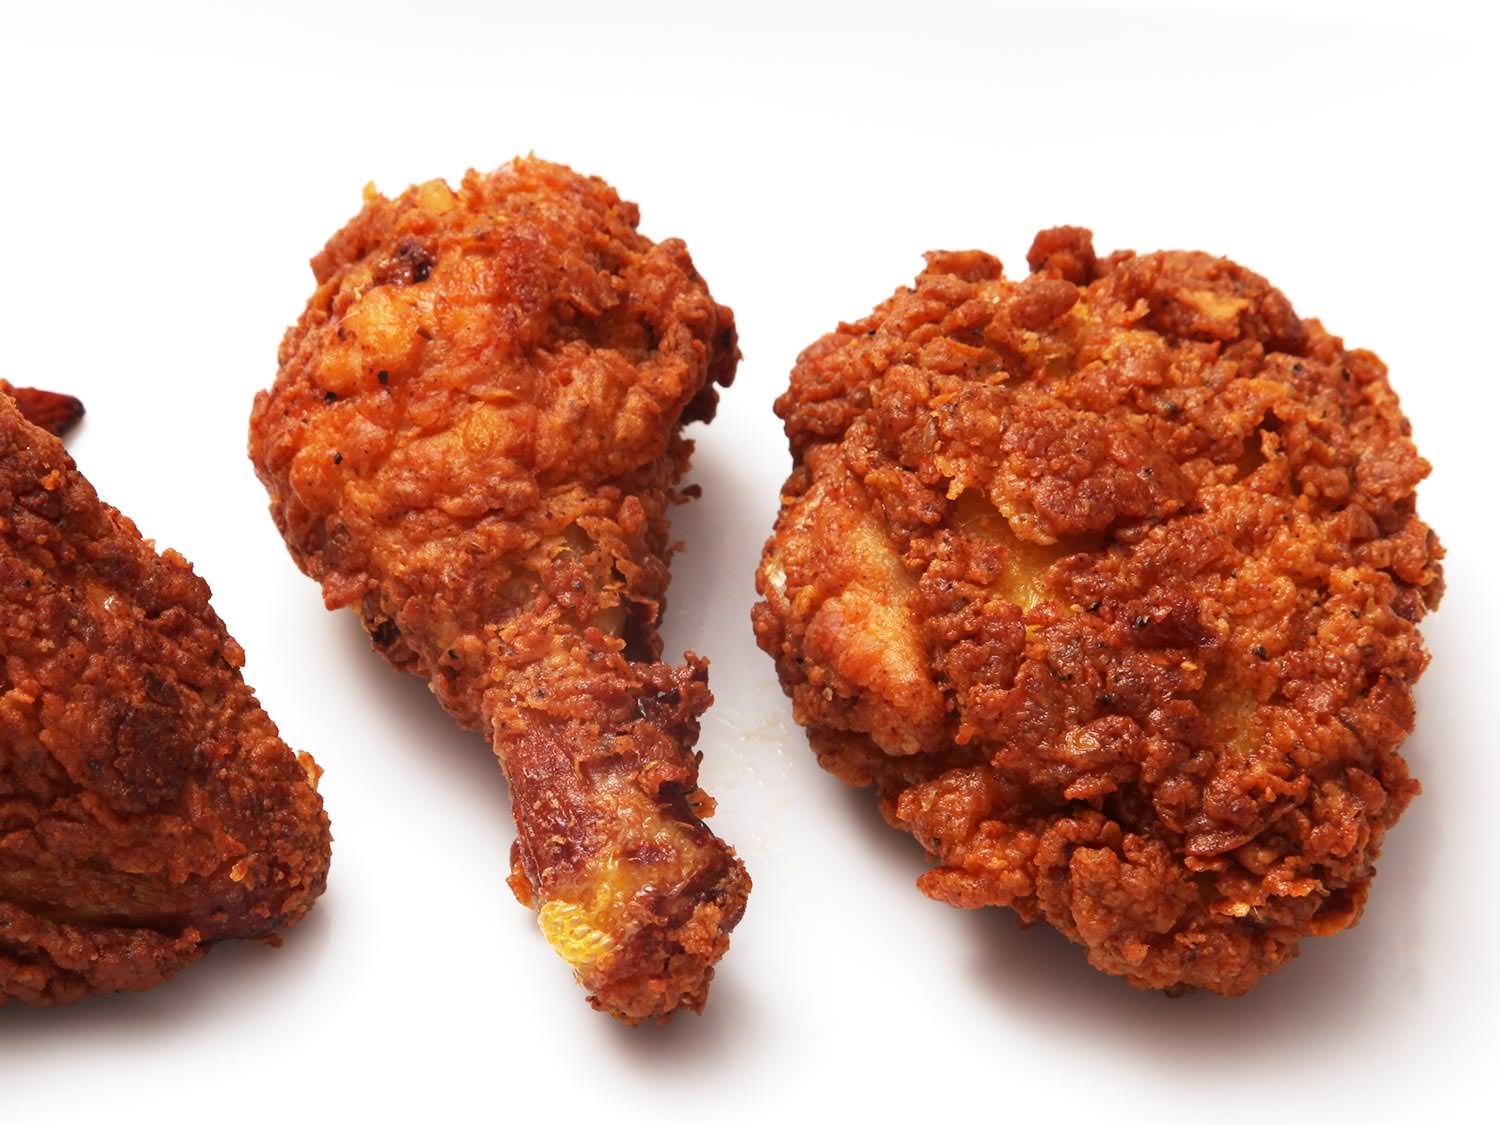 Get the most flavor out of your fried chicken.